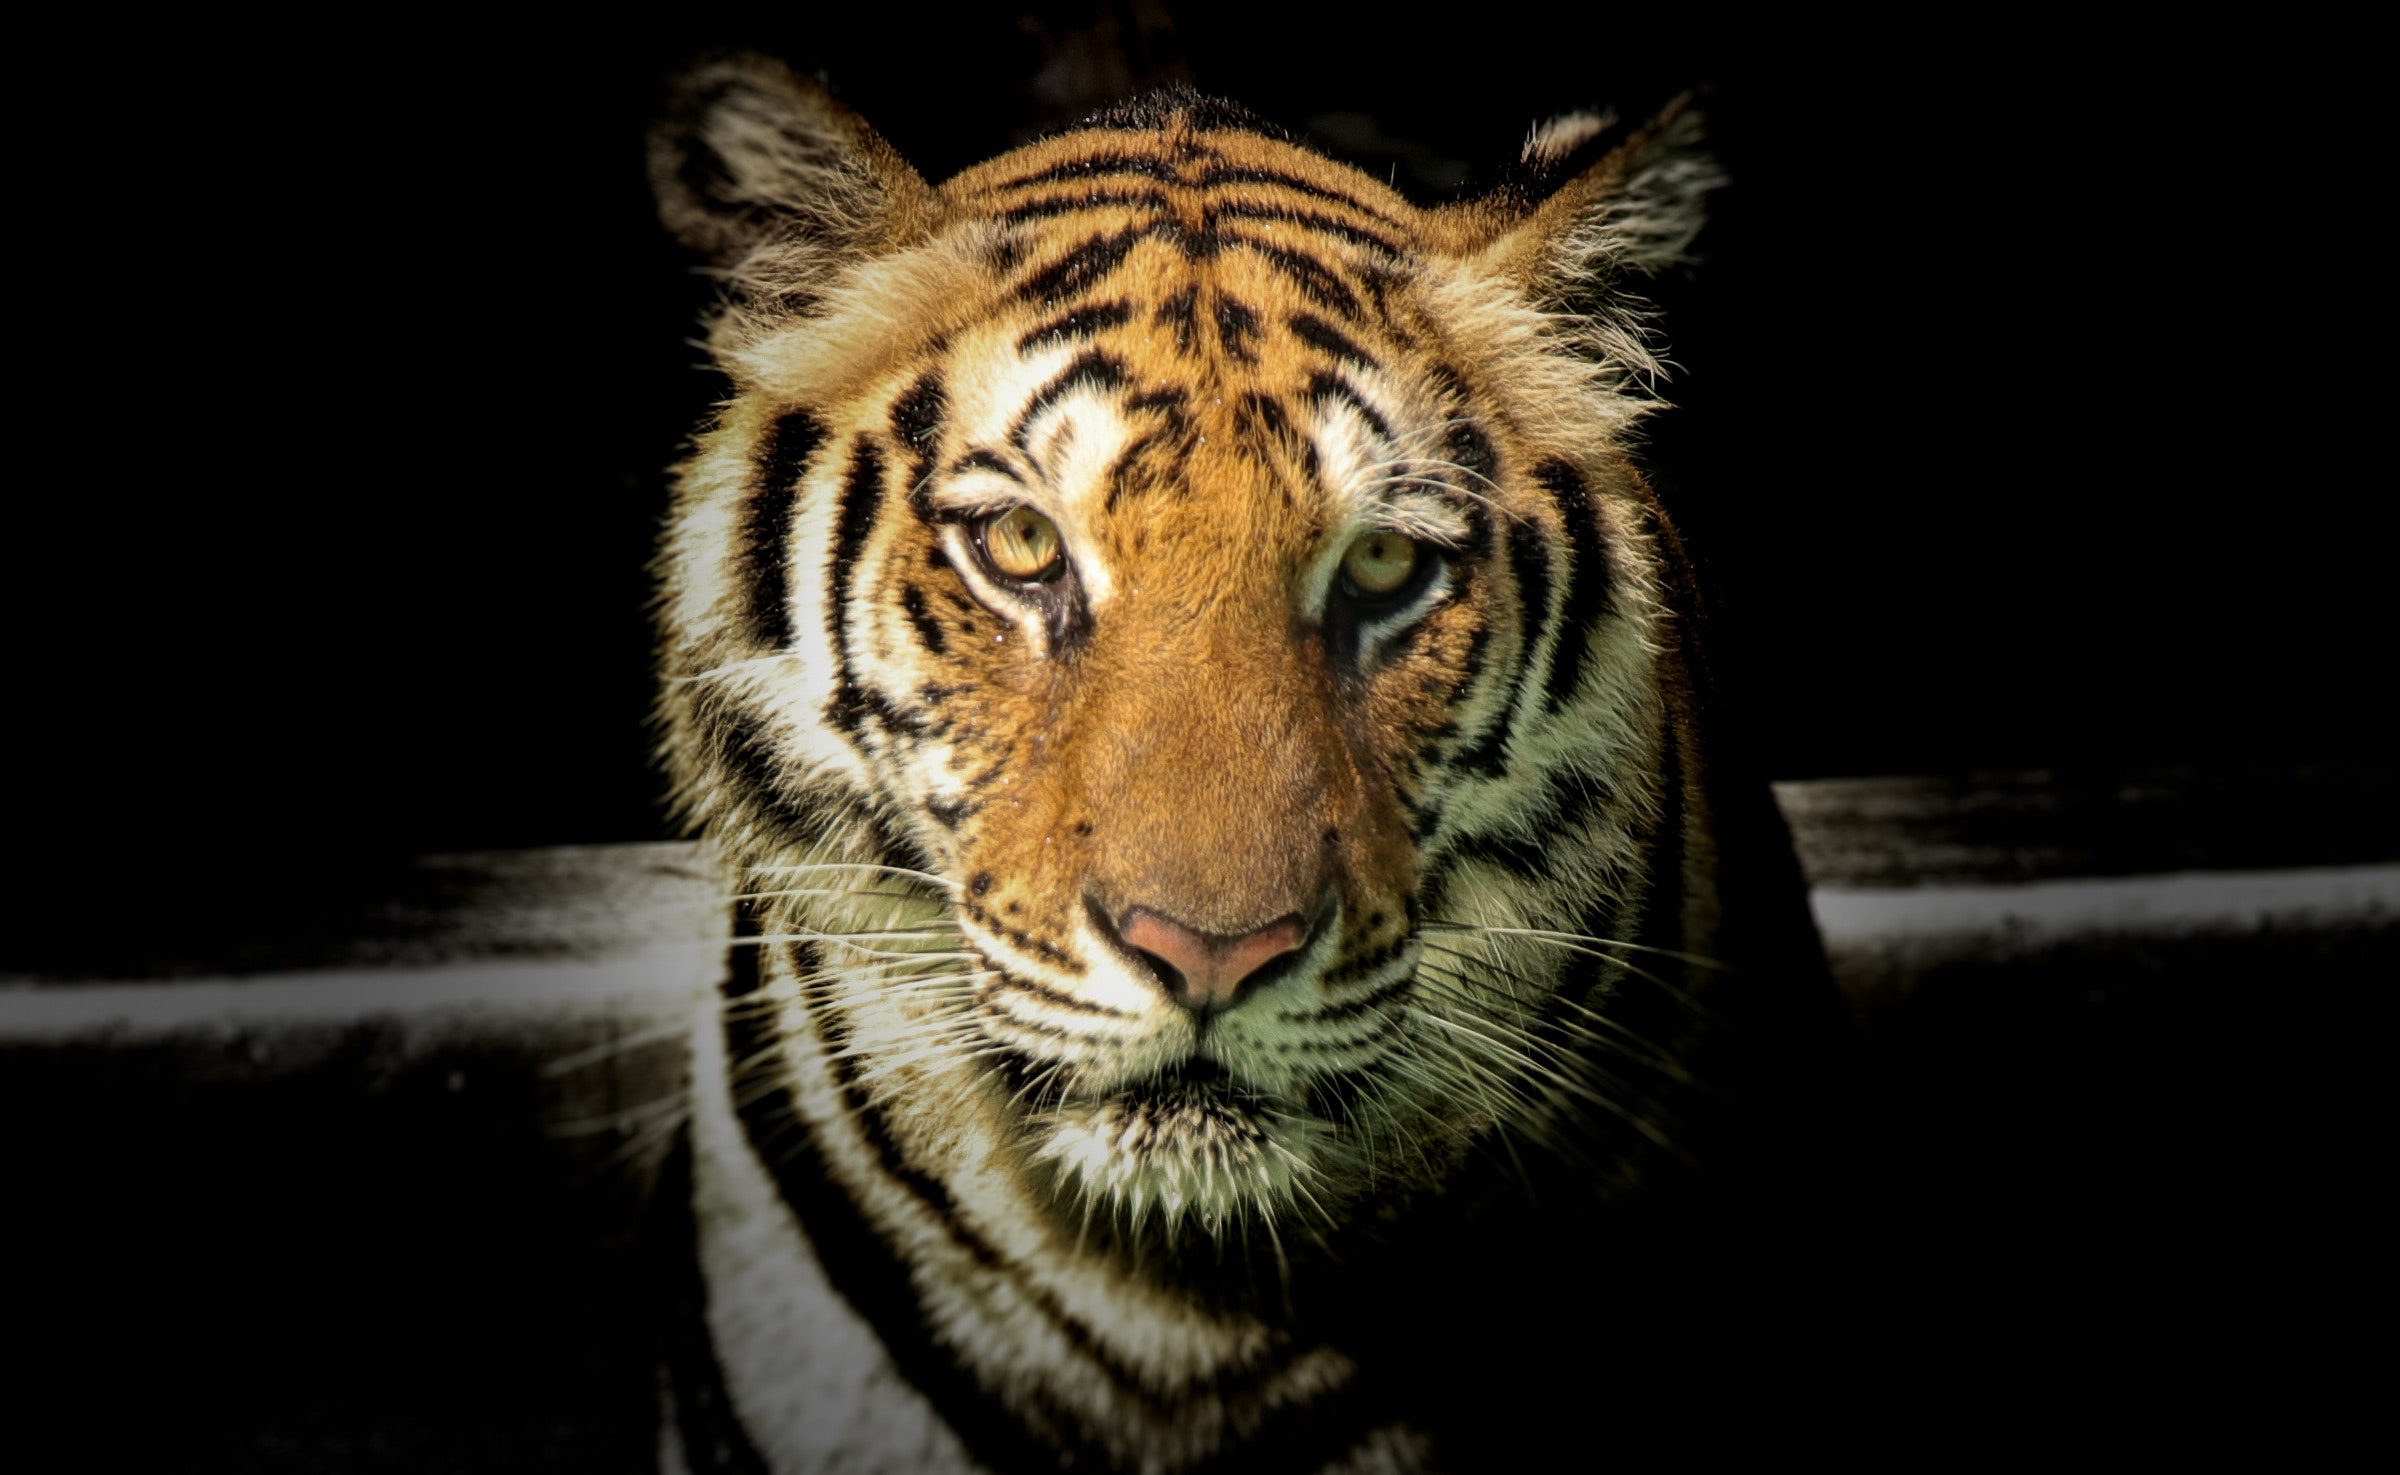 a dramatic photo of a tiger on a black background